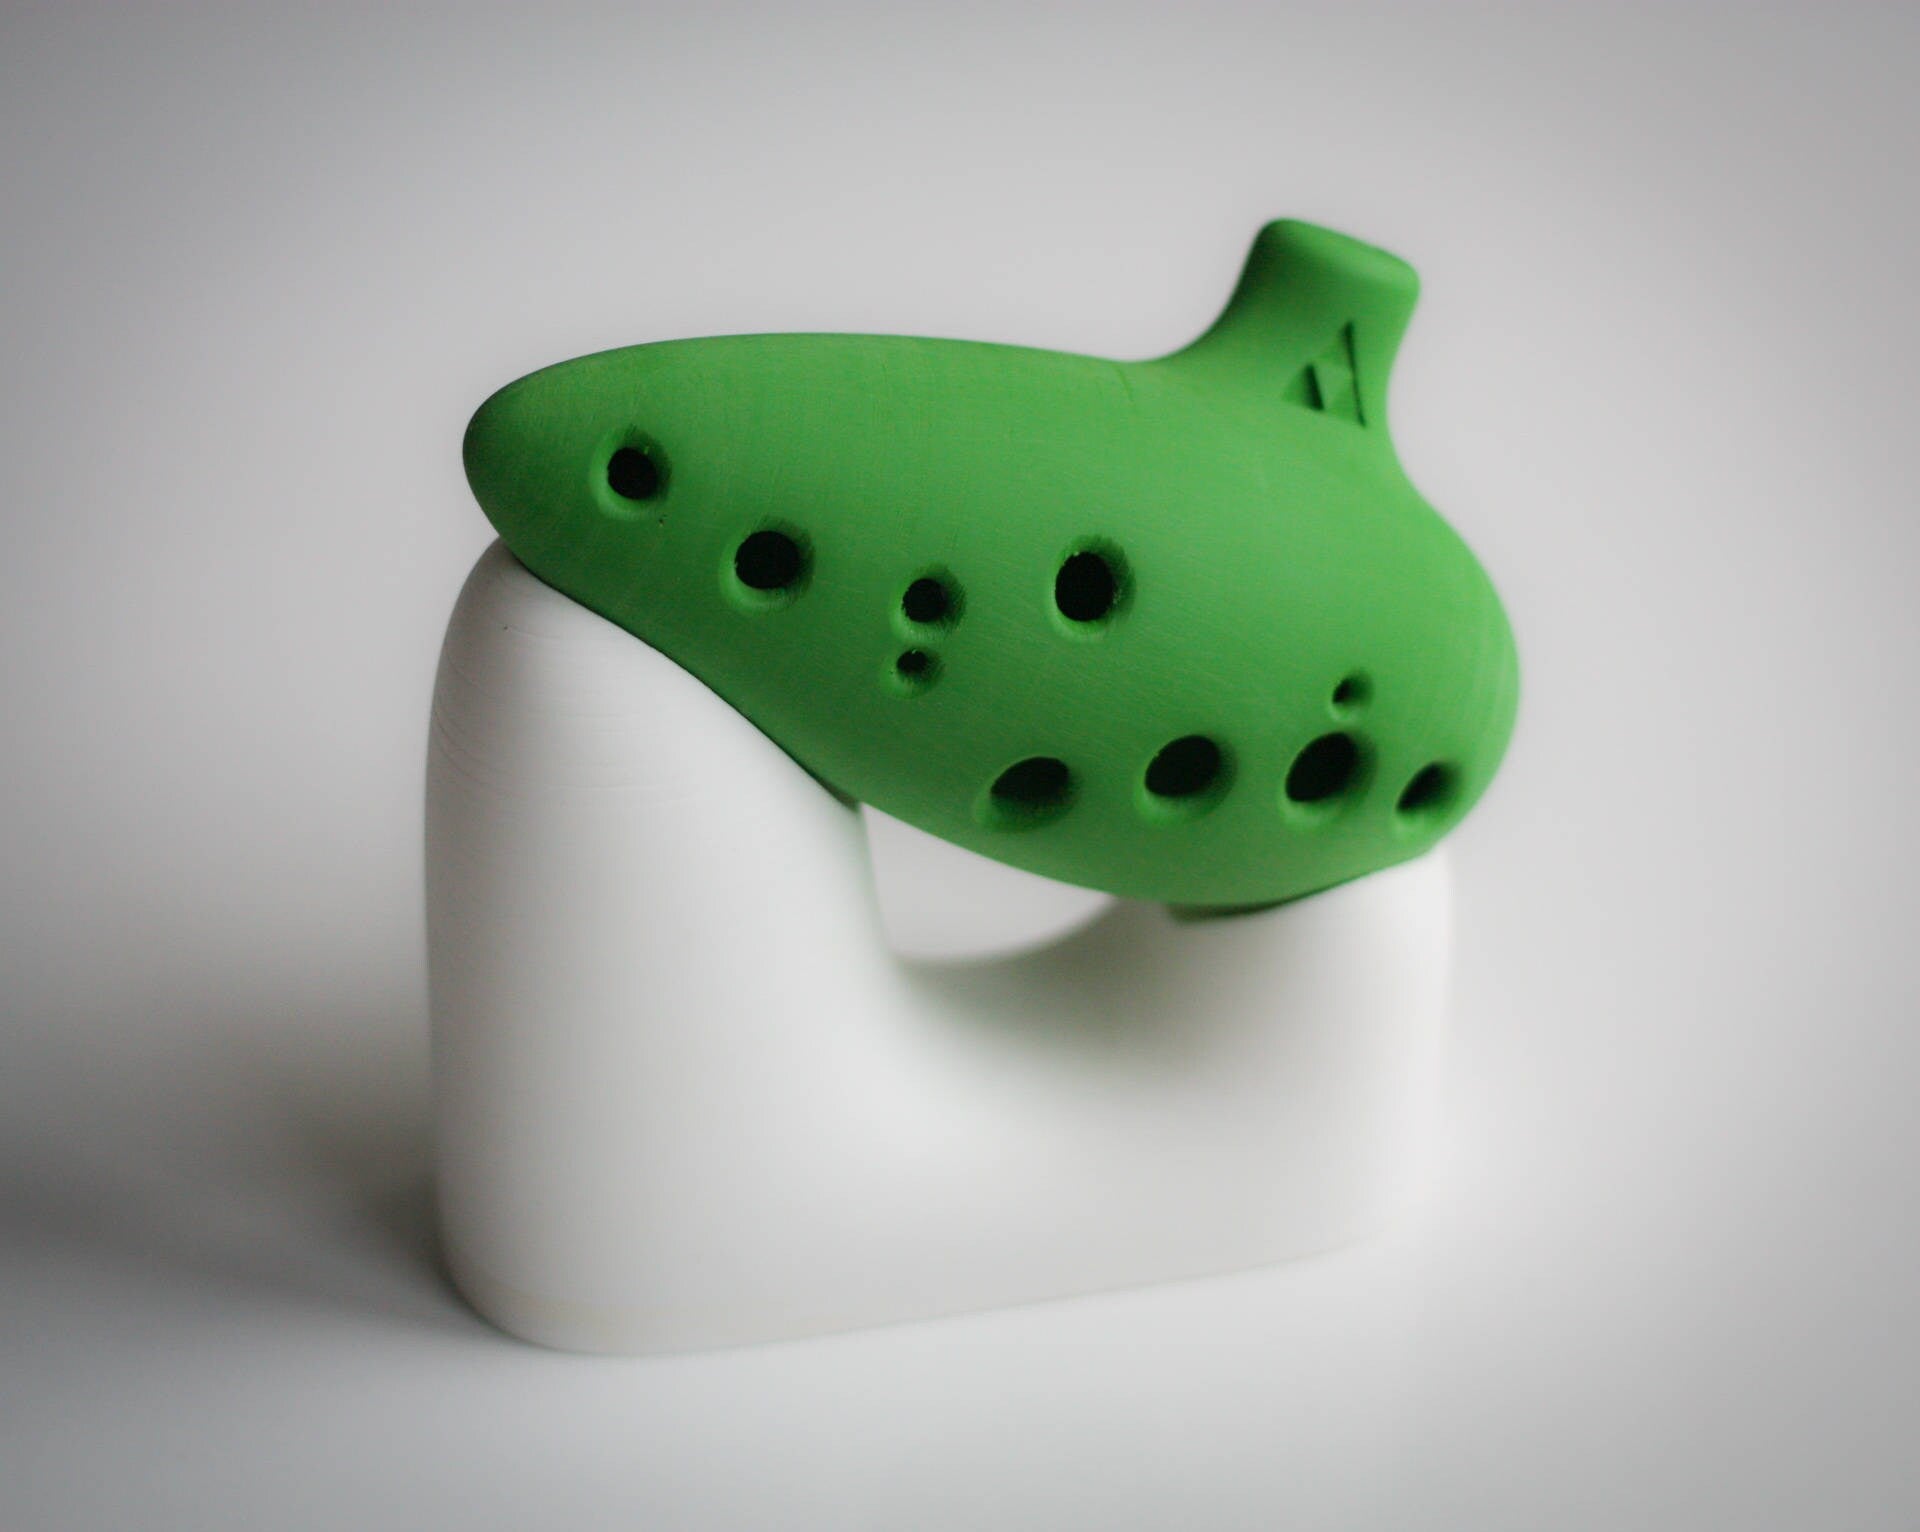  12 Hole Ocarina From the Legend of Zelda By STL Ocarina :  Musical Instruments